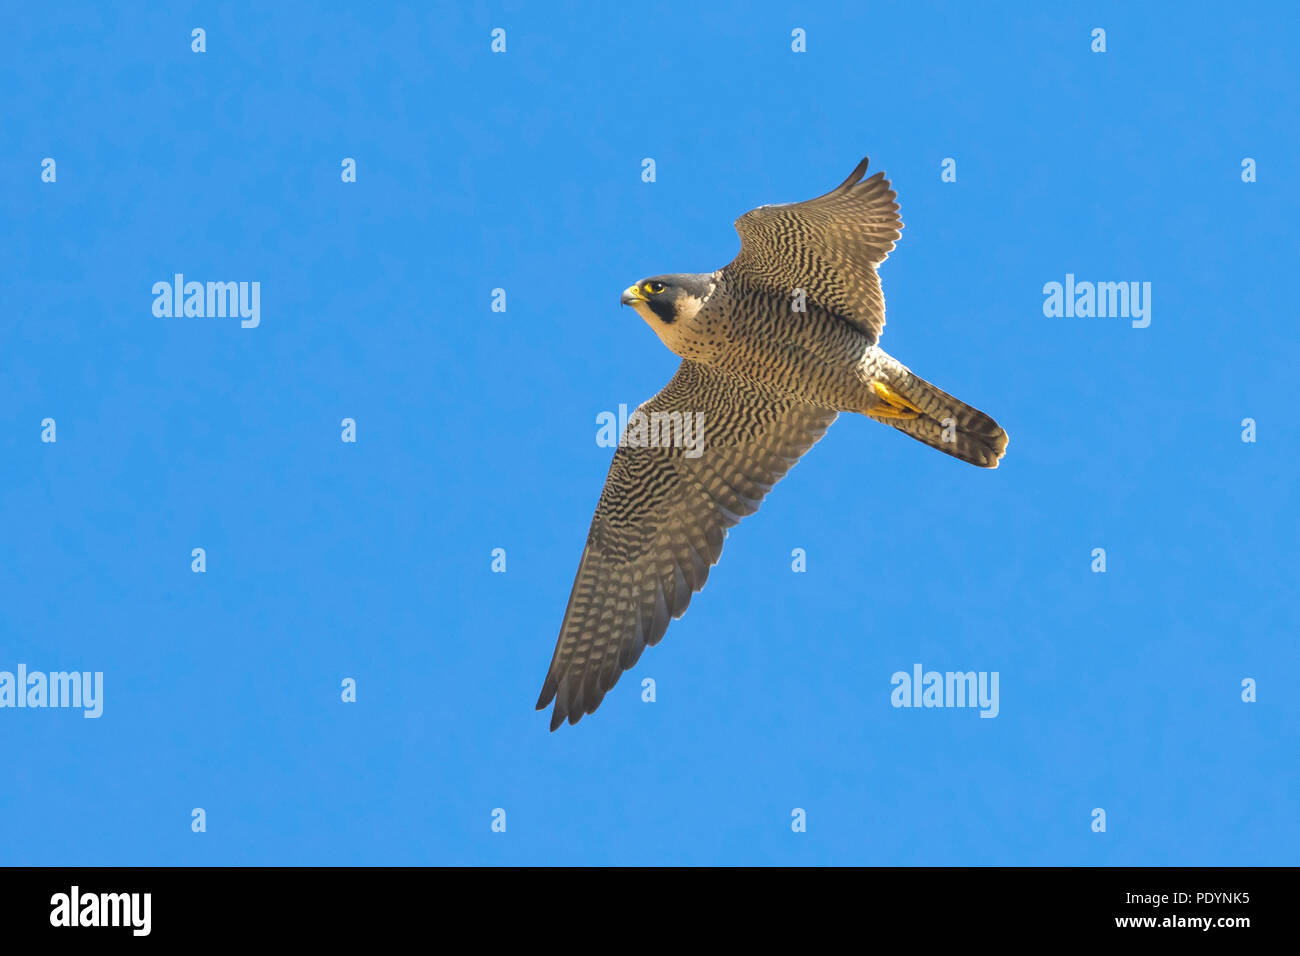 Flying adult Peregrine (Falco peregrinus) against blue sky Stock Photo